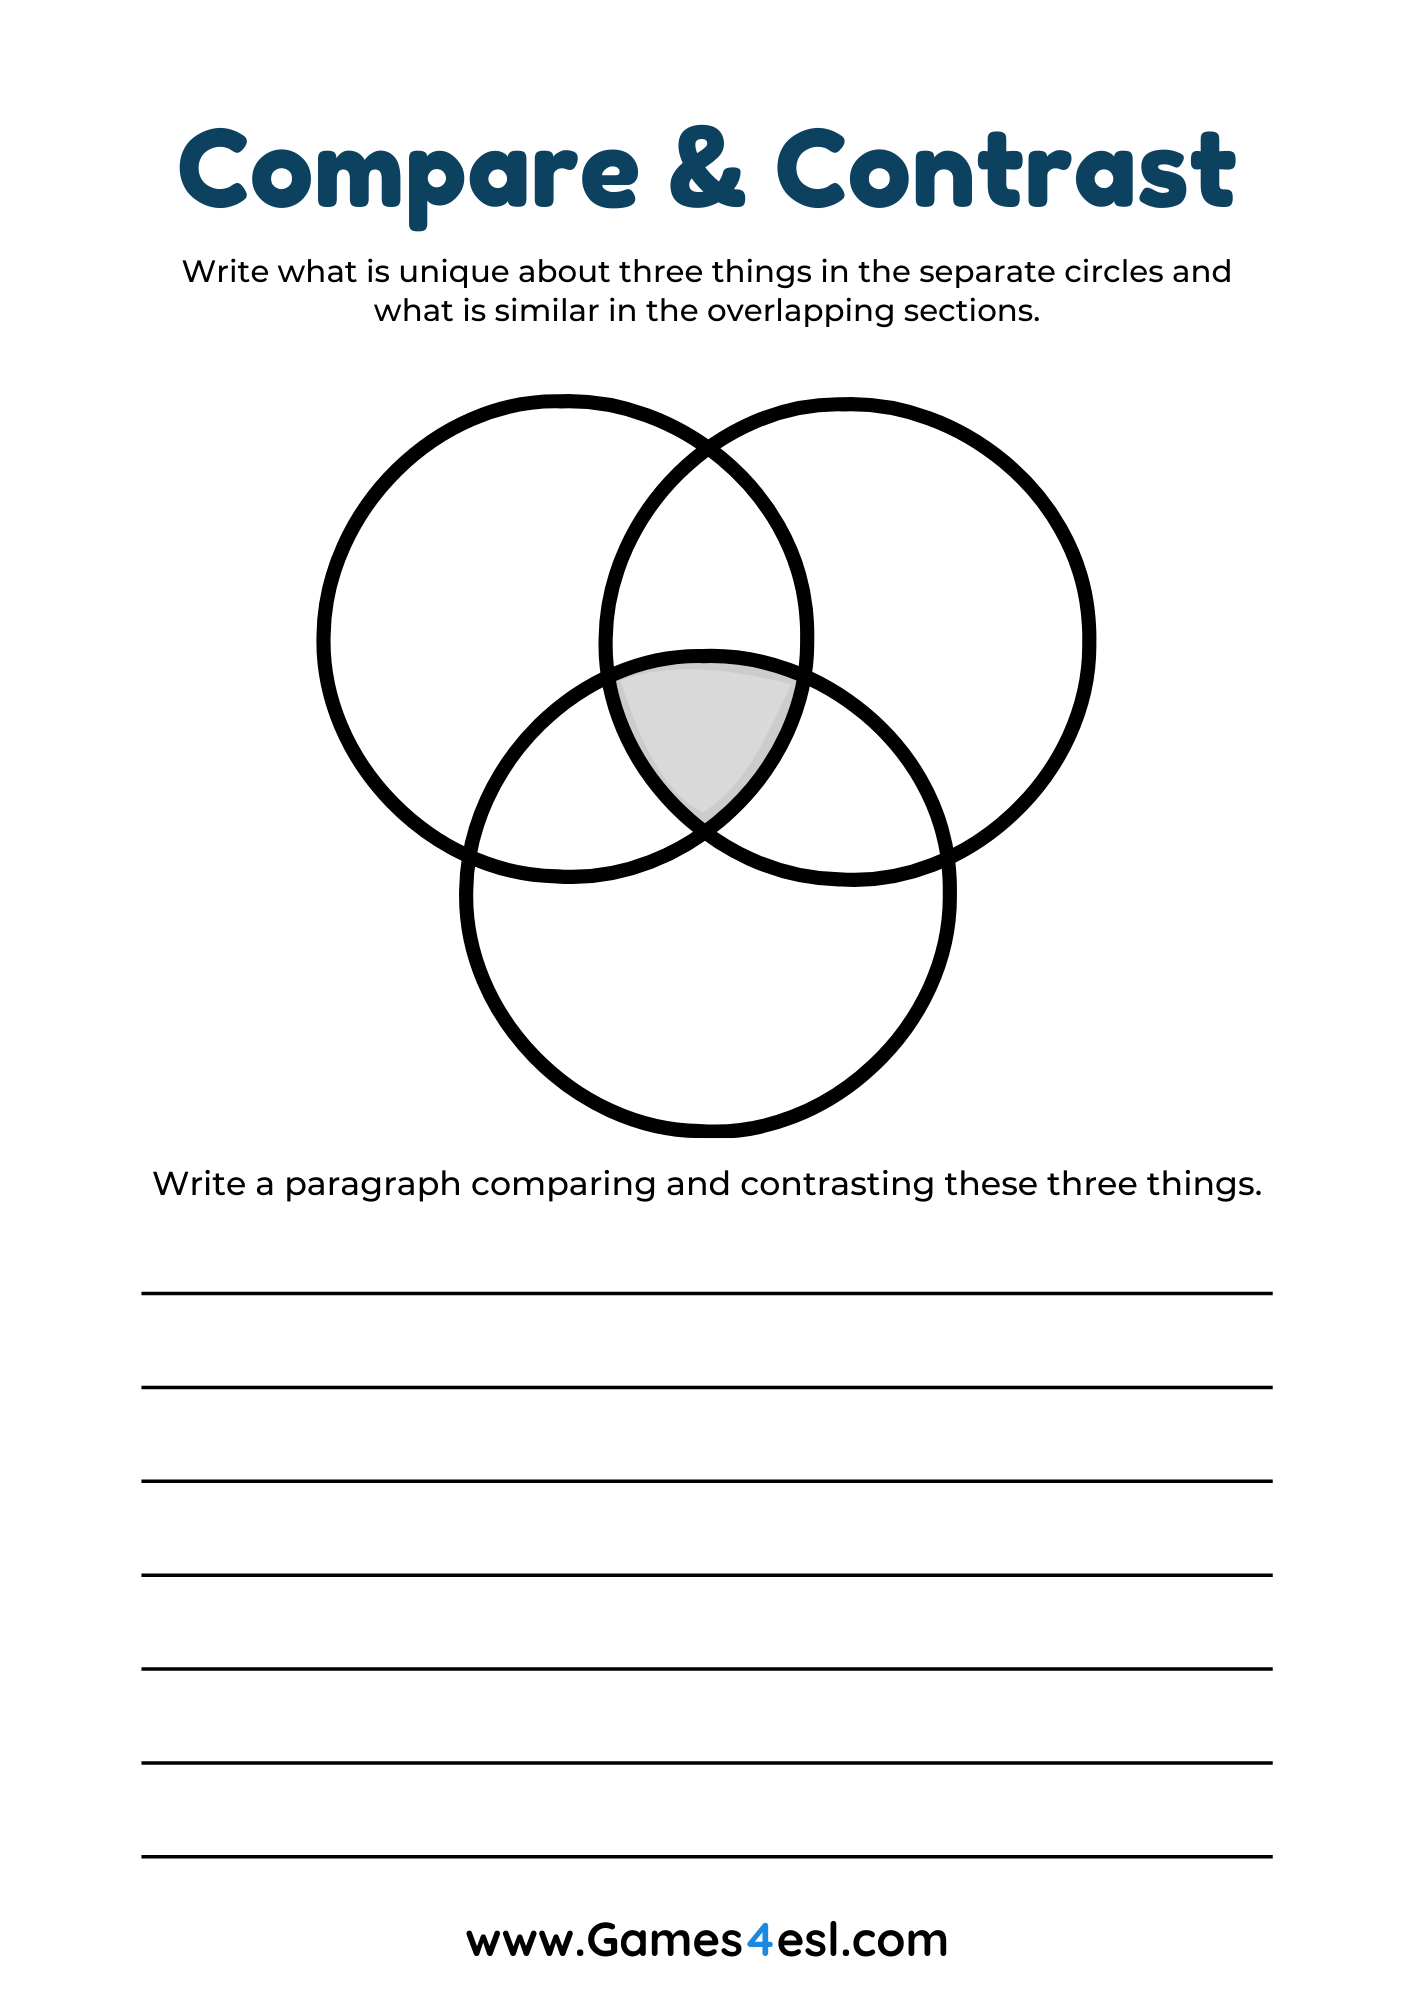 A Compare and Contrast worksheet with a Venn diagram.